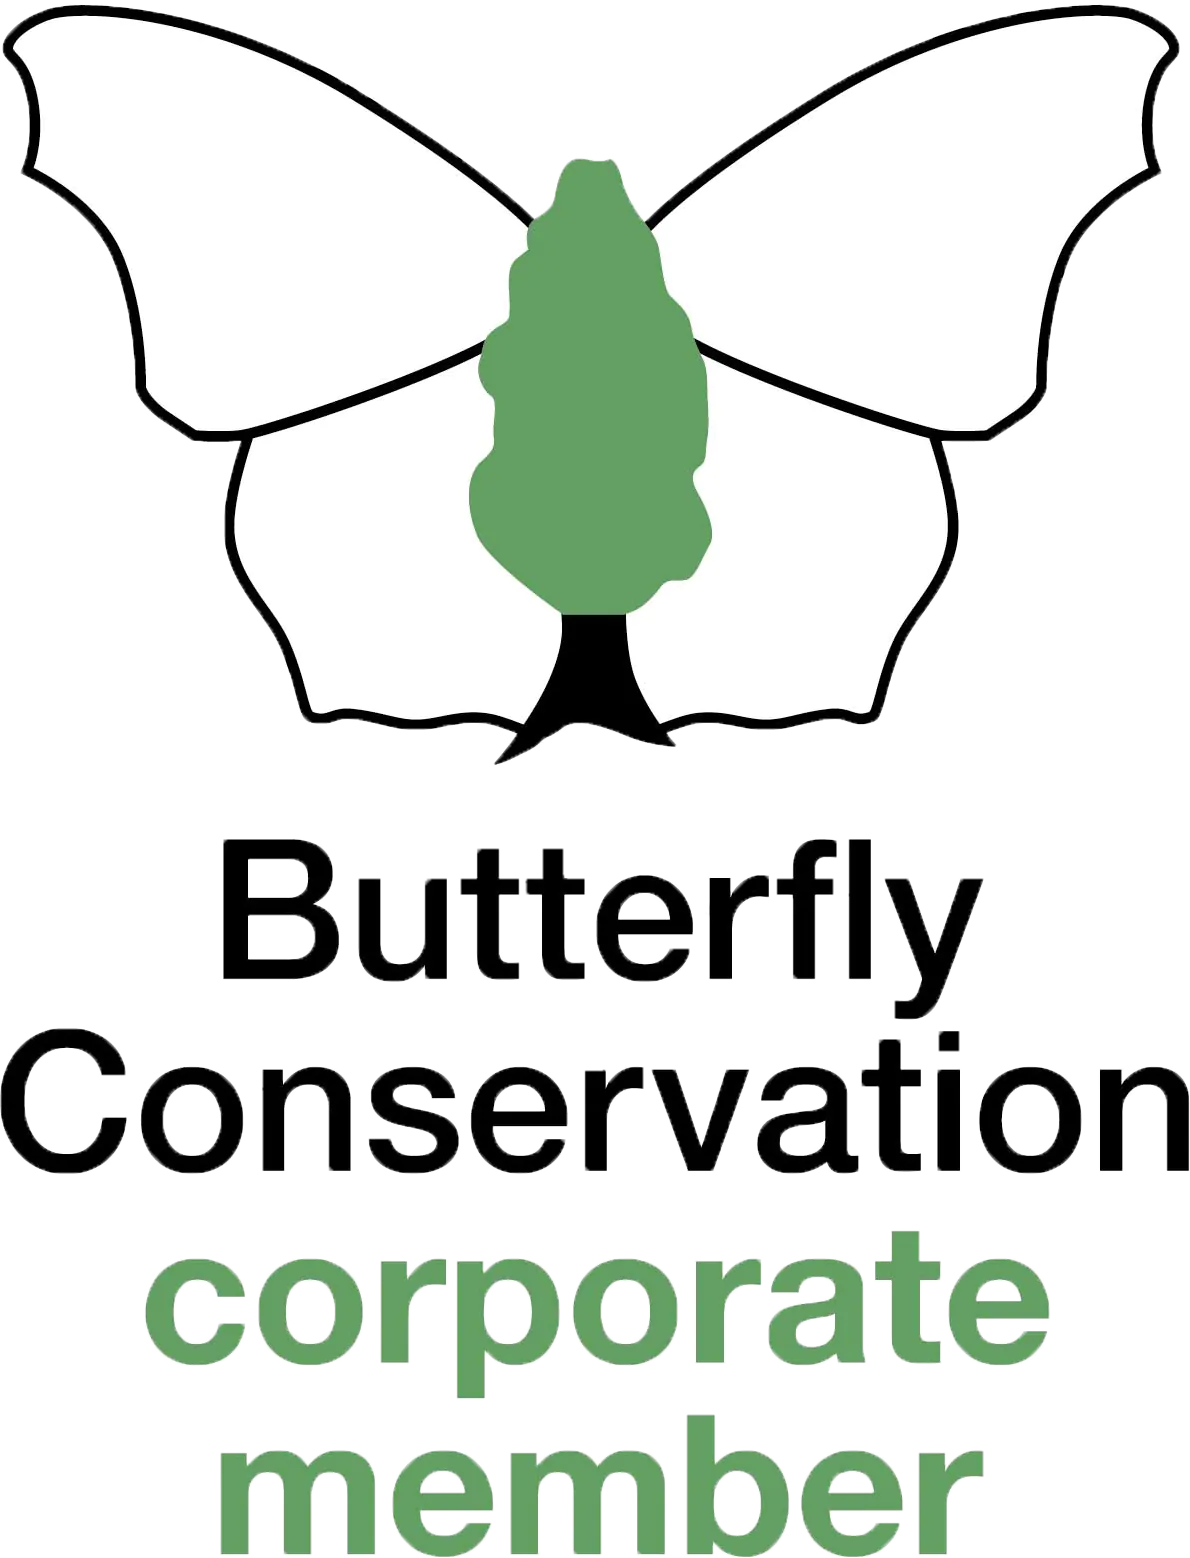 Butterly Conservation Corporate Member logo